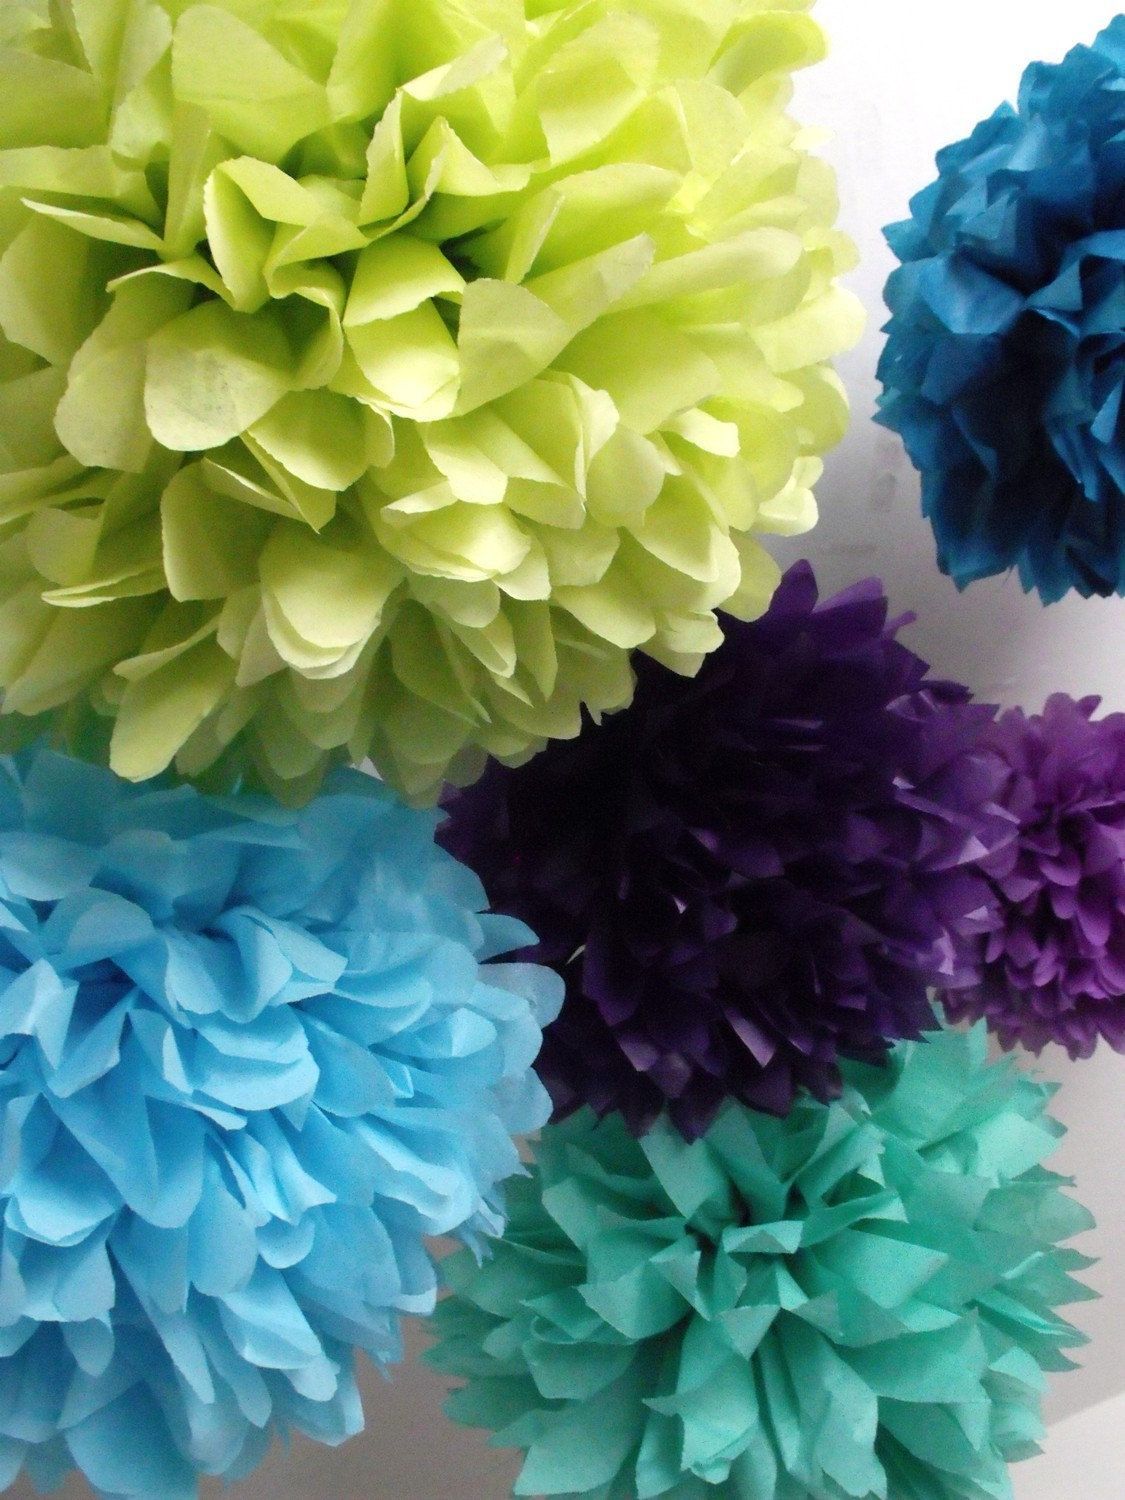 Peacock wedding  40 Tissue paper pompoms  peacock party by pomtree